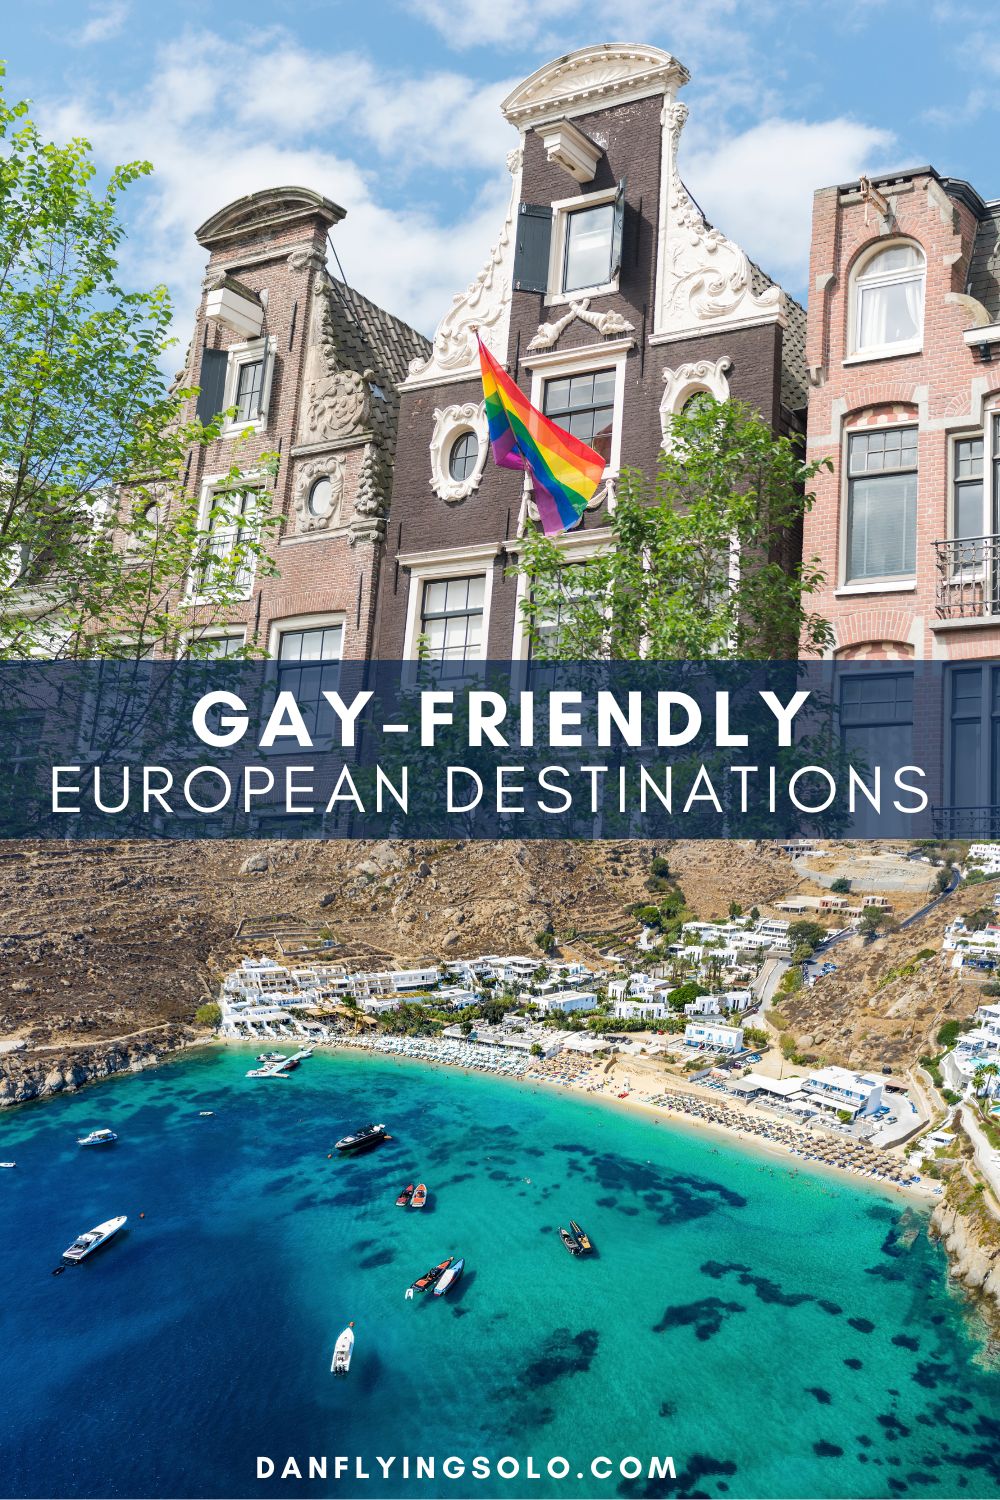 8 of Europe’s Most Gay-Friendly Cities & Destinations